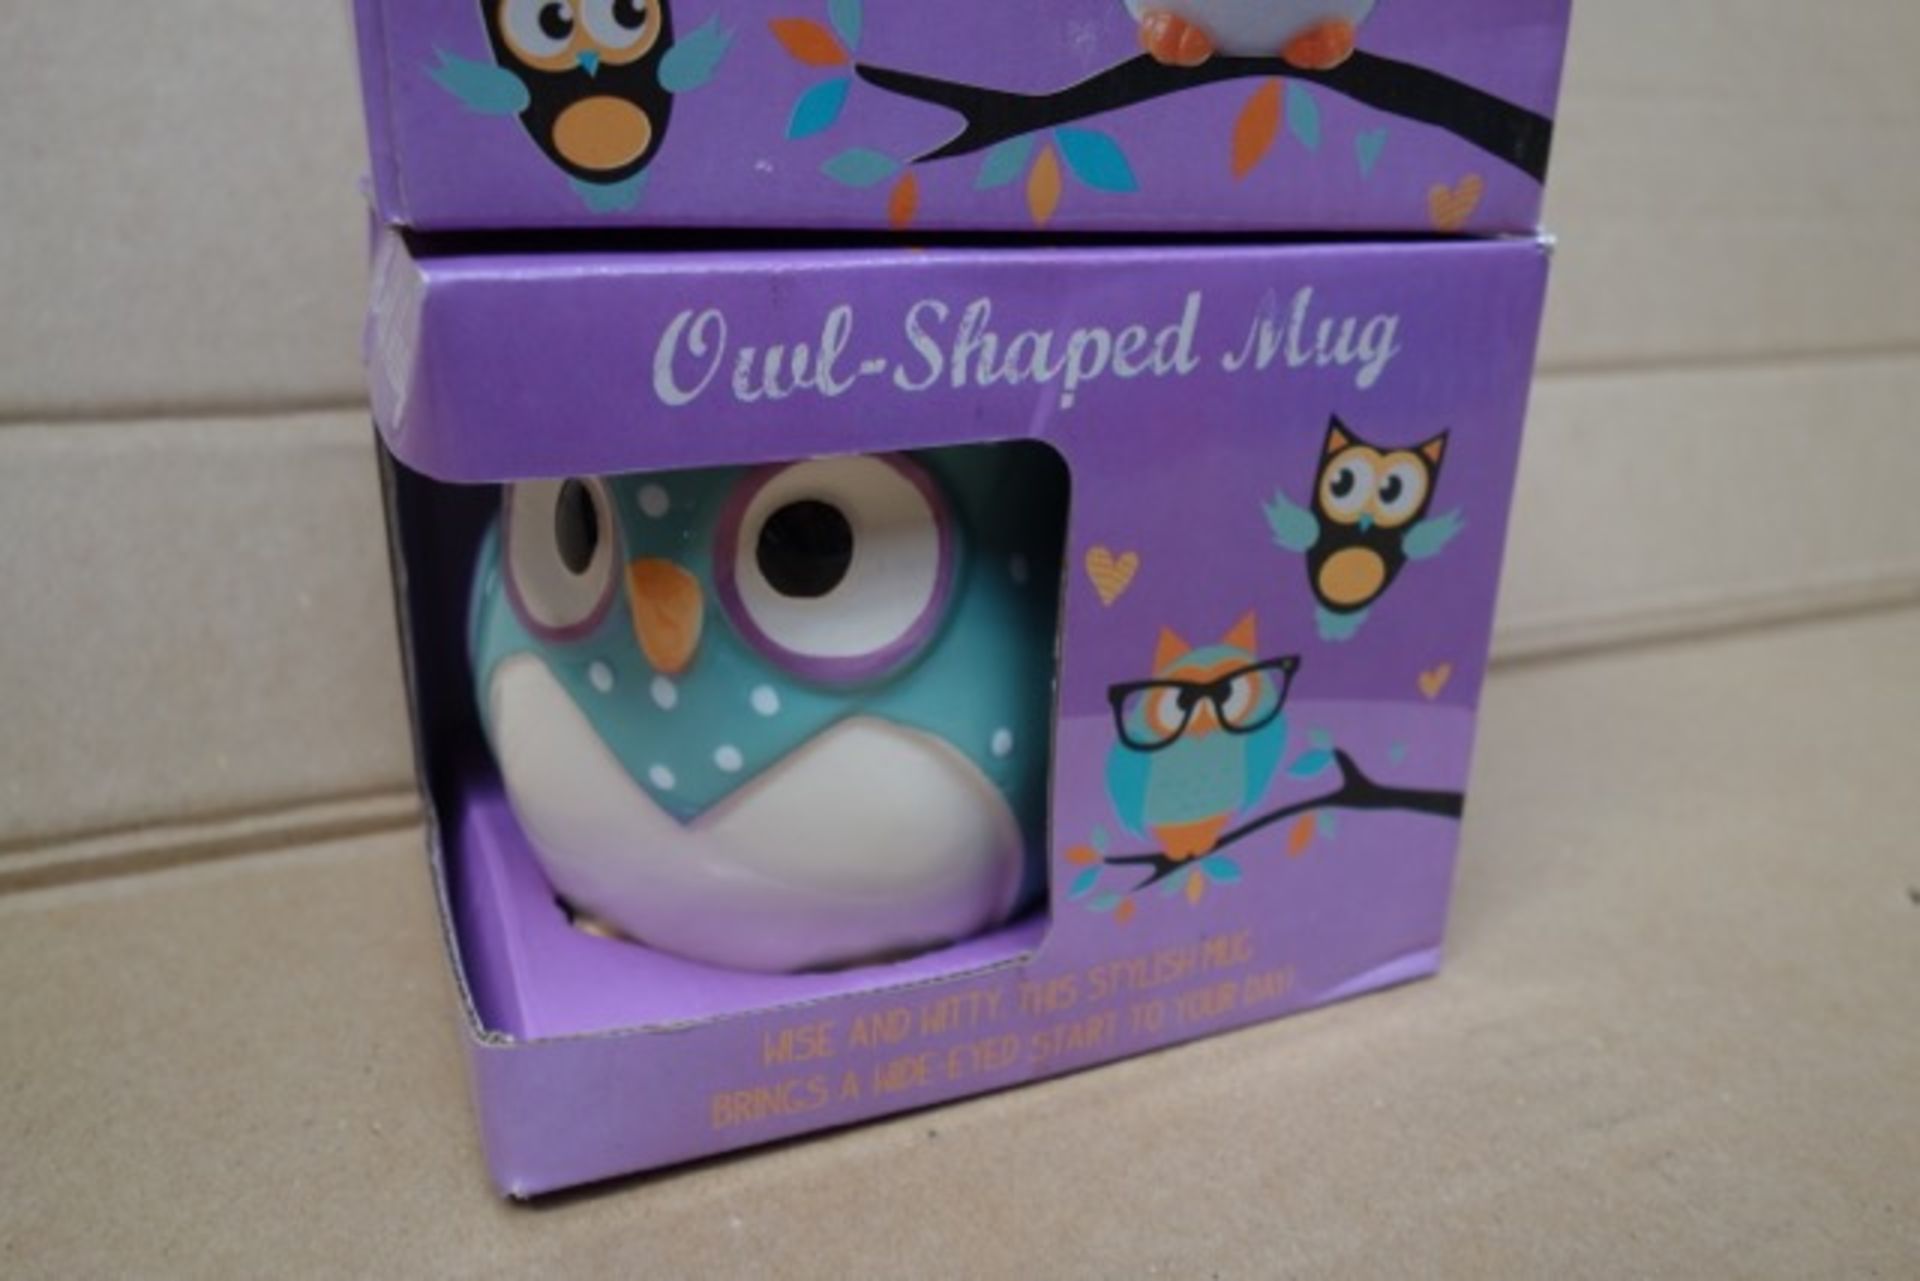 36 x Owl Shaped Mugs. 'Wise and Witty, this stylish mug brings a wide eyed start to your day! RRP £